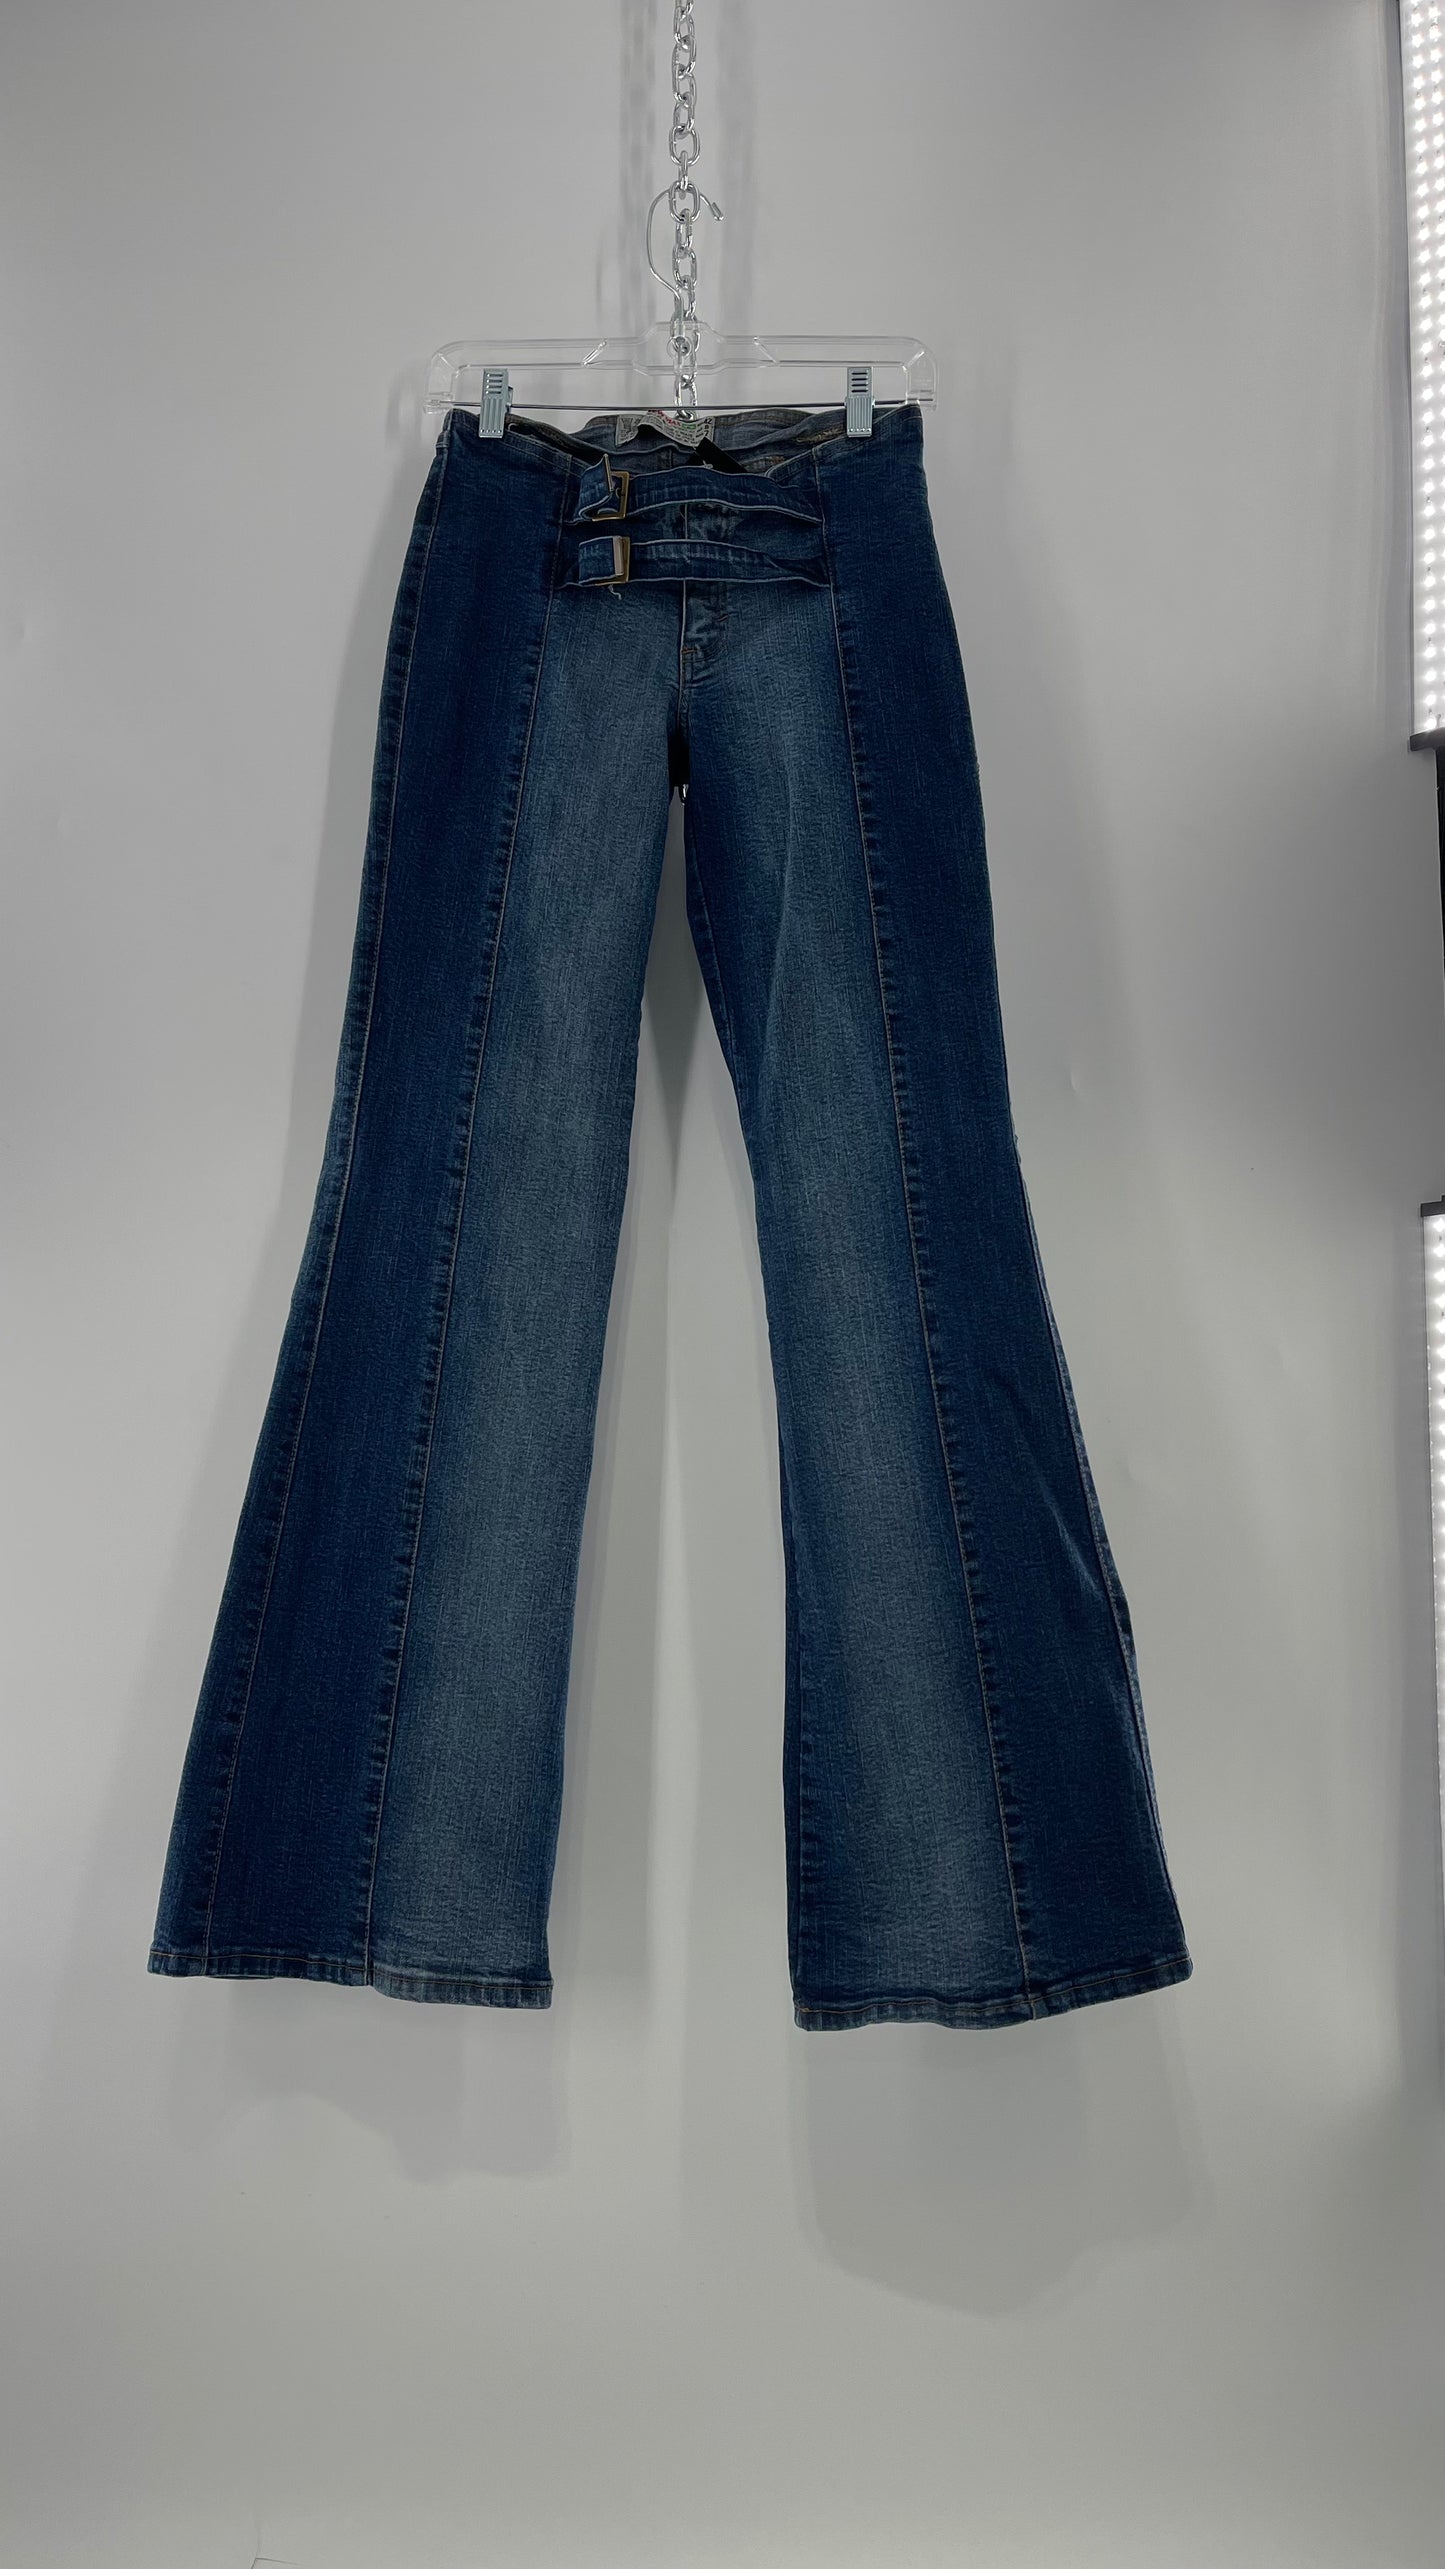 Vintage NewMax Two Toned Paneled Brazilian Jeans with Buckle Jean Strap Closure and Flared Hem (8)